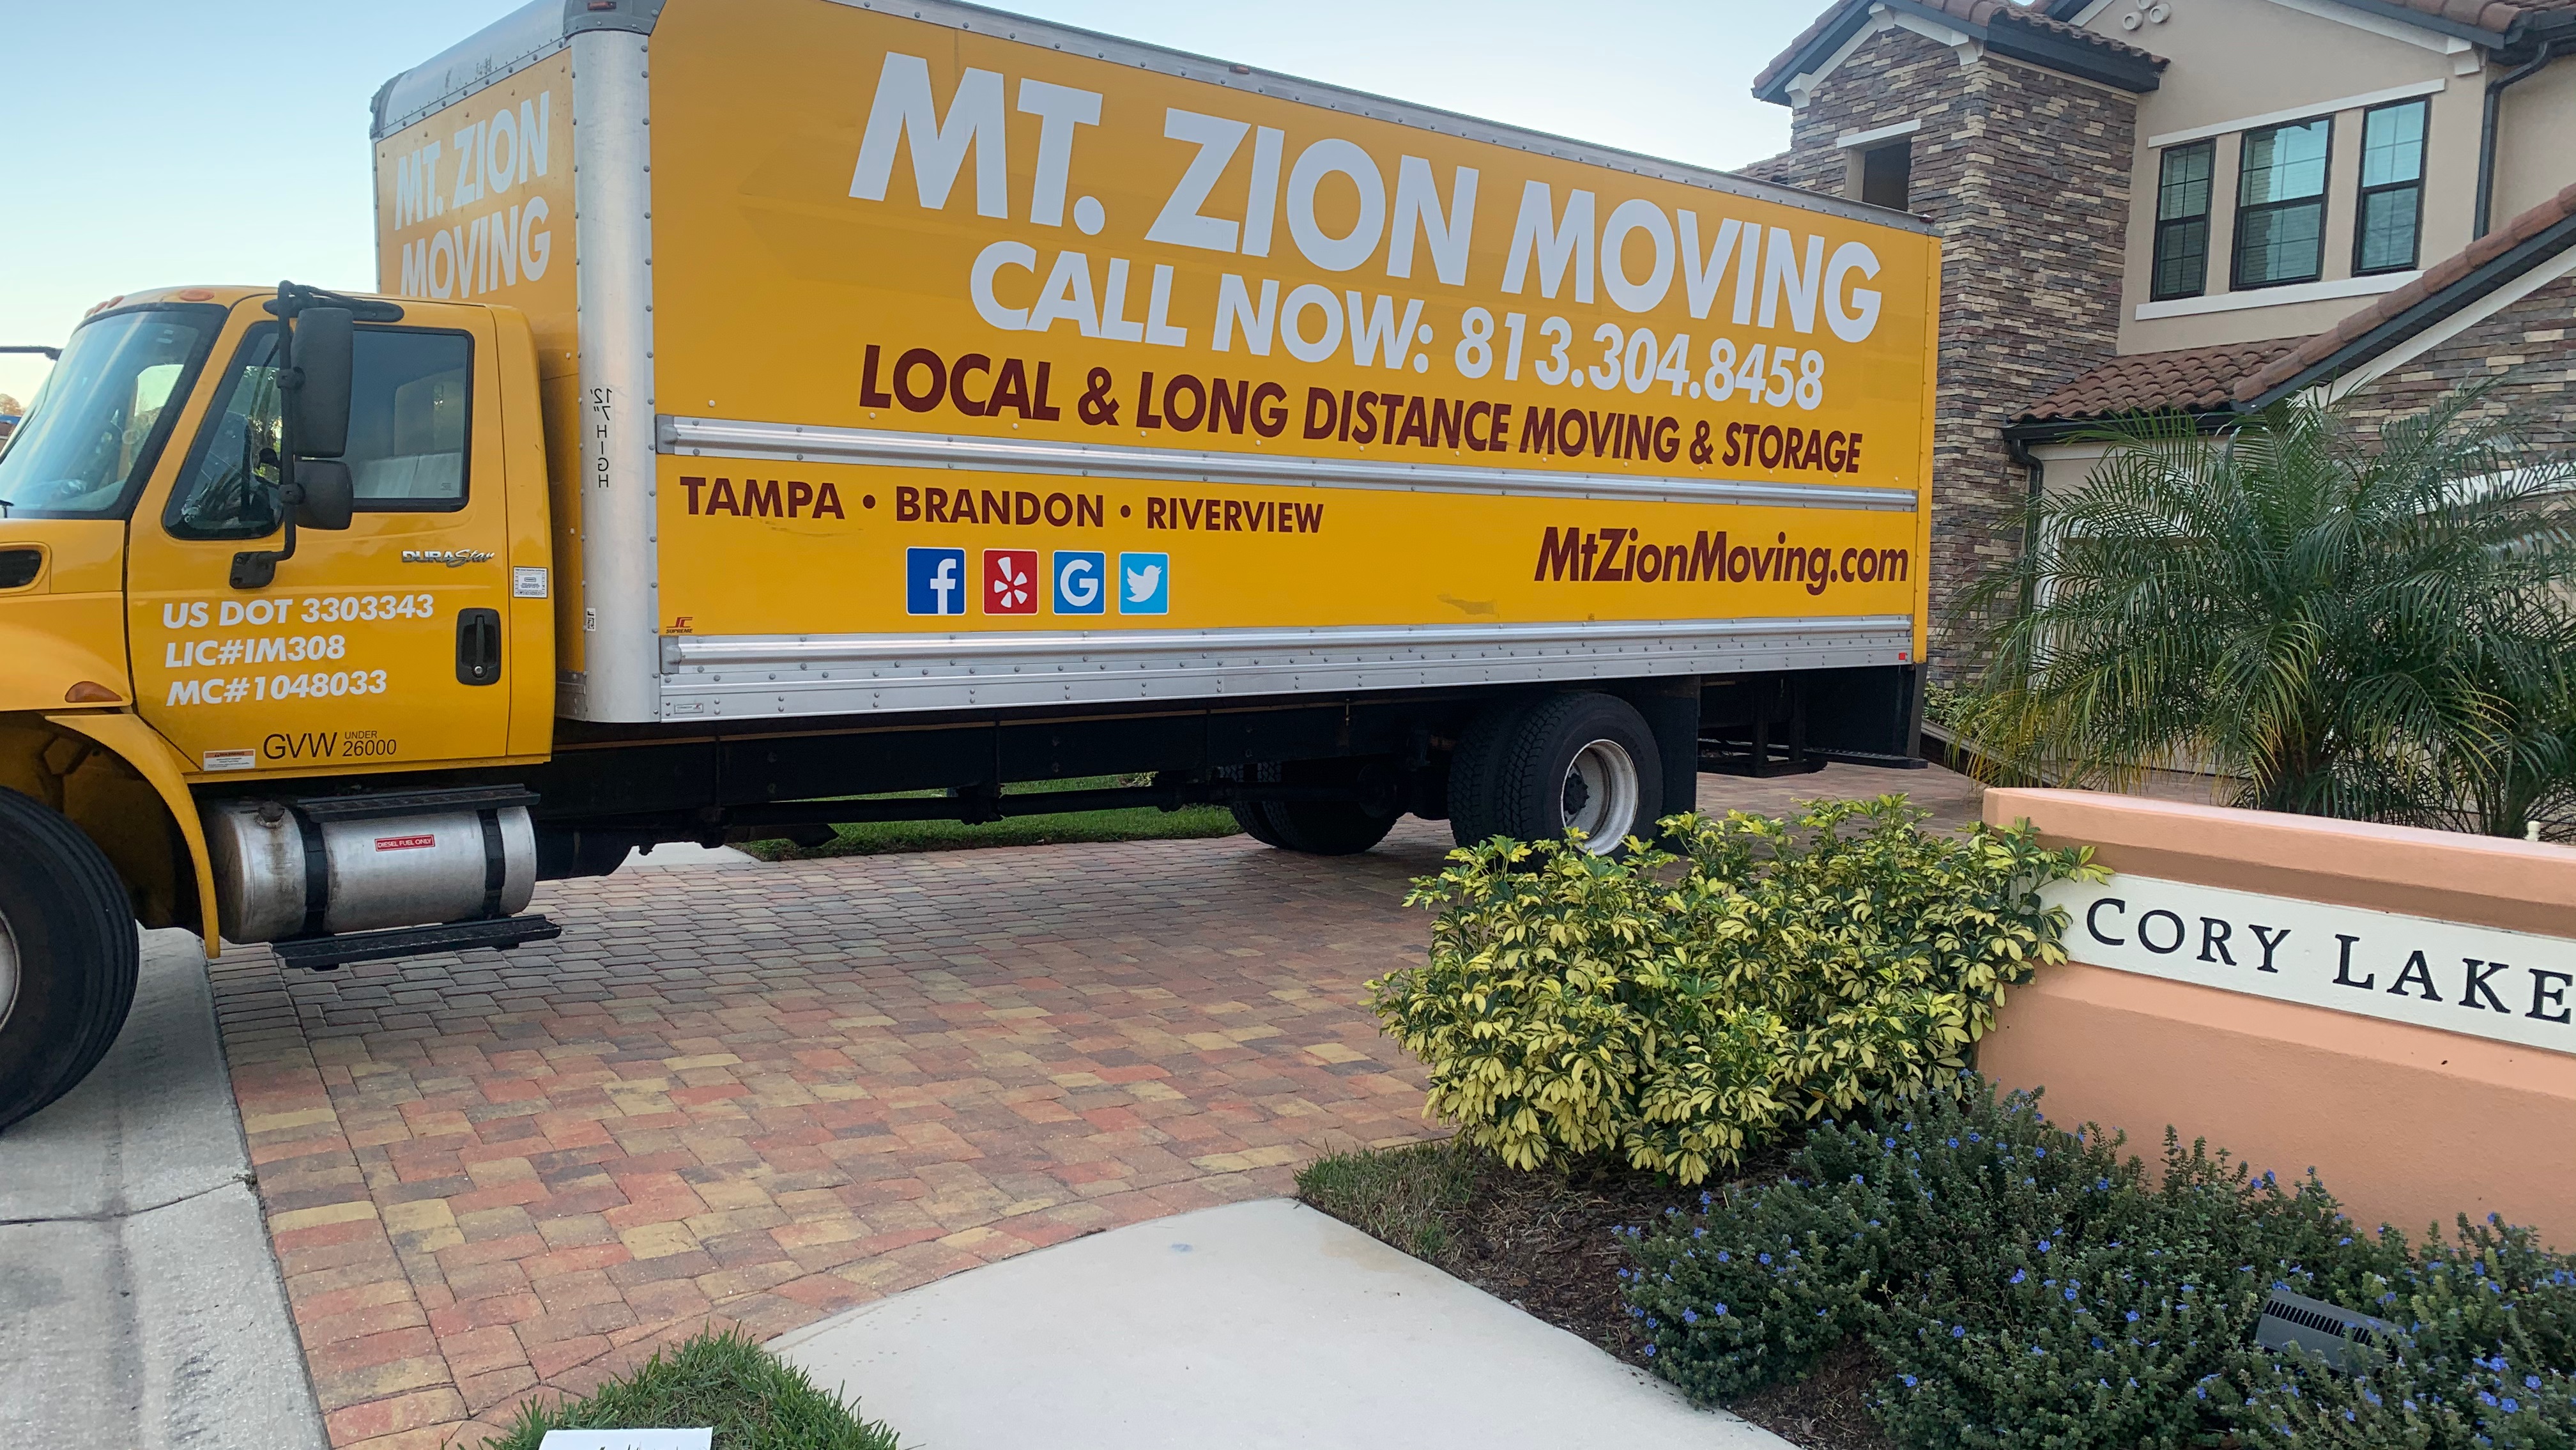 Affordable hot tub moving services in Jan Phyl Village, FL